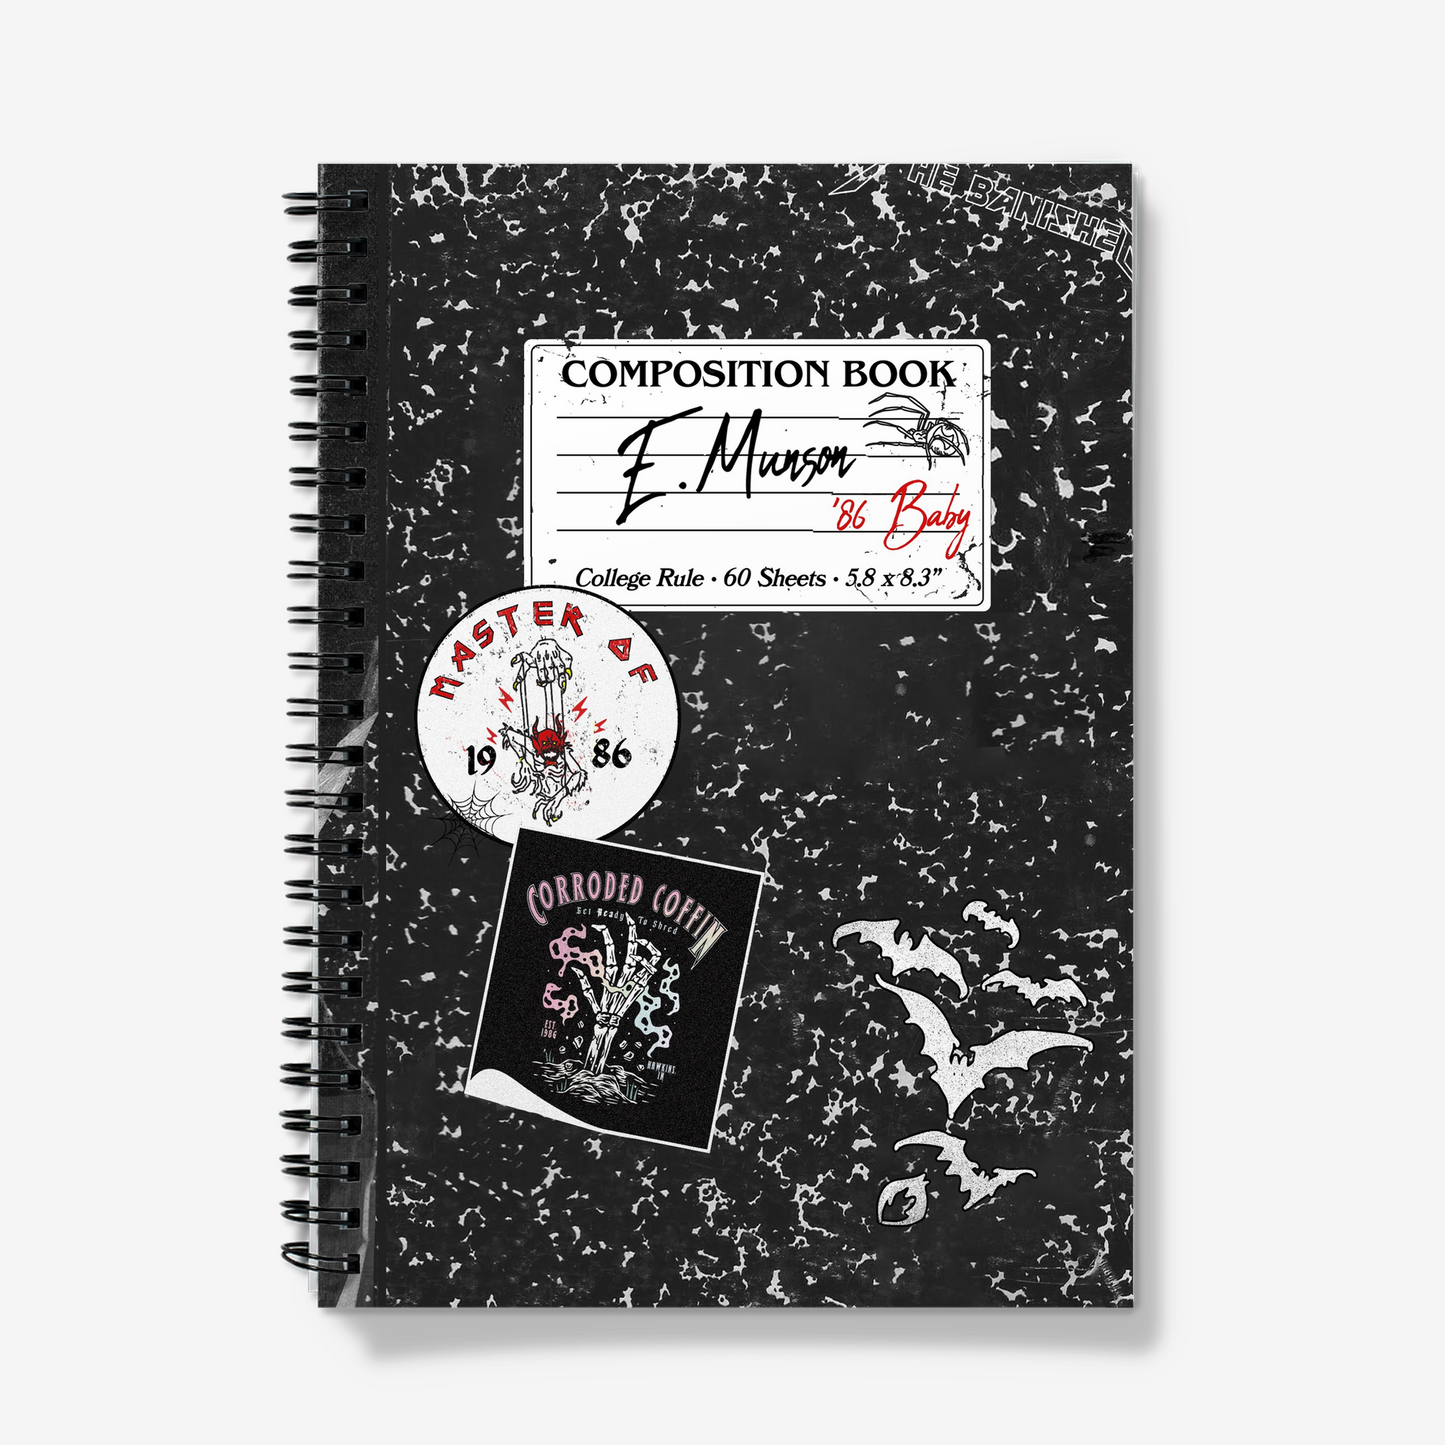 Eddie M A5 Spiral Composition Notebook Lined Paper